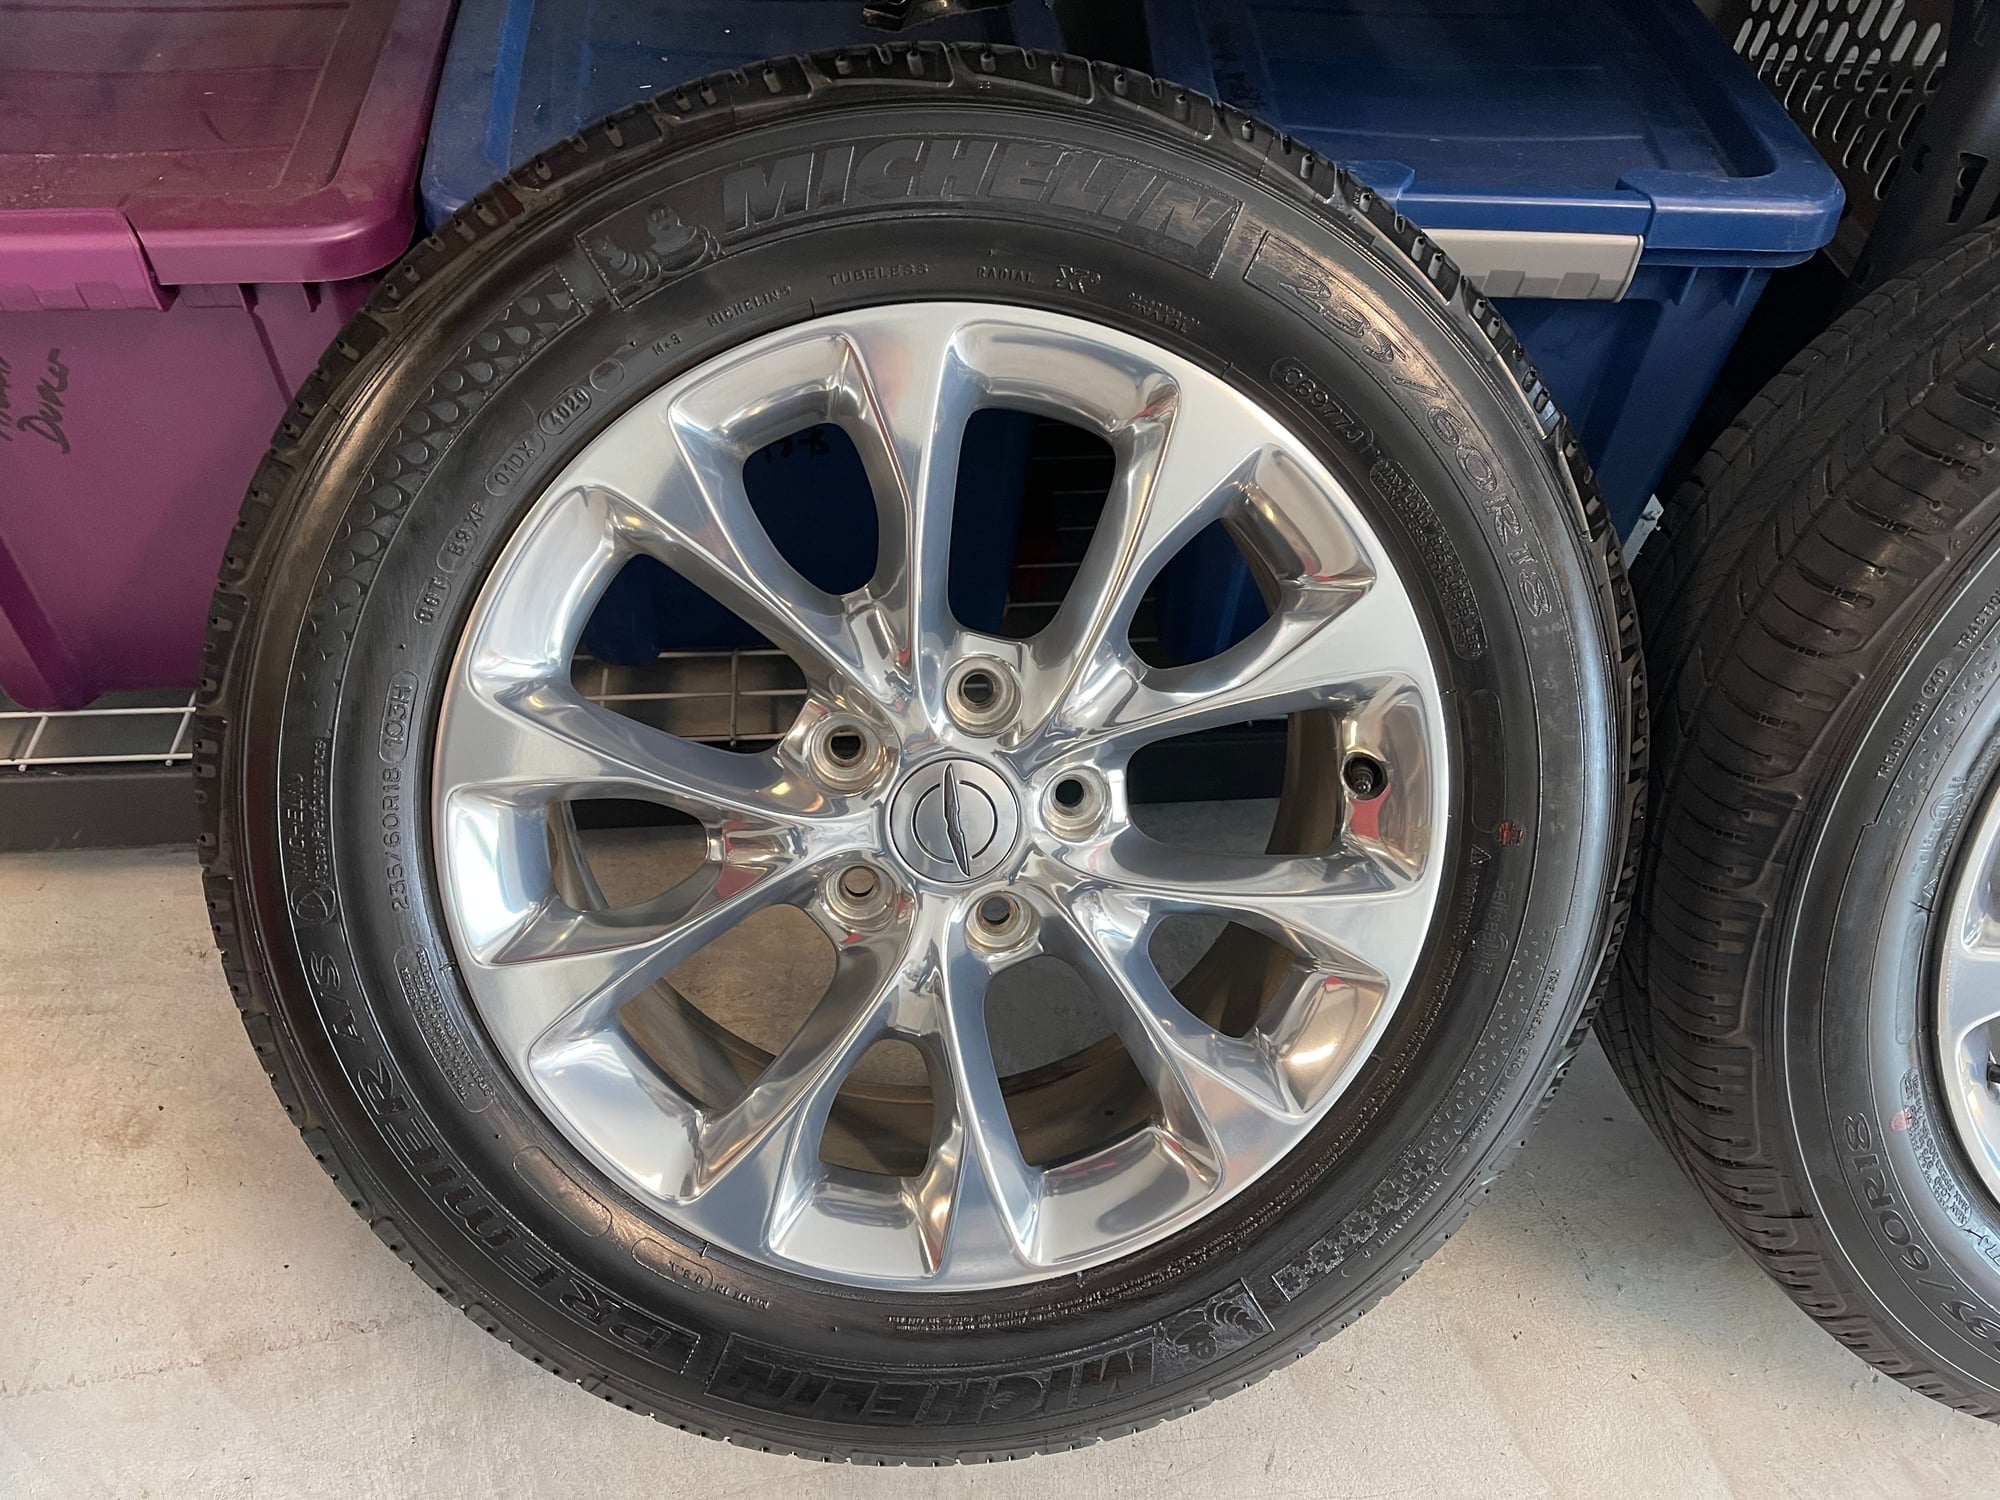 Wheels and Tires/Axles - 2021 OEM Pacifica 18" Wheels and Tires - Used - 2021 Chrysler Pacifica - Katy, TX 77493, United States